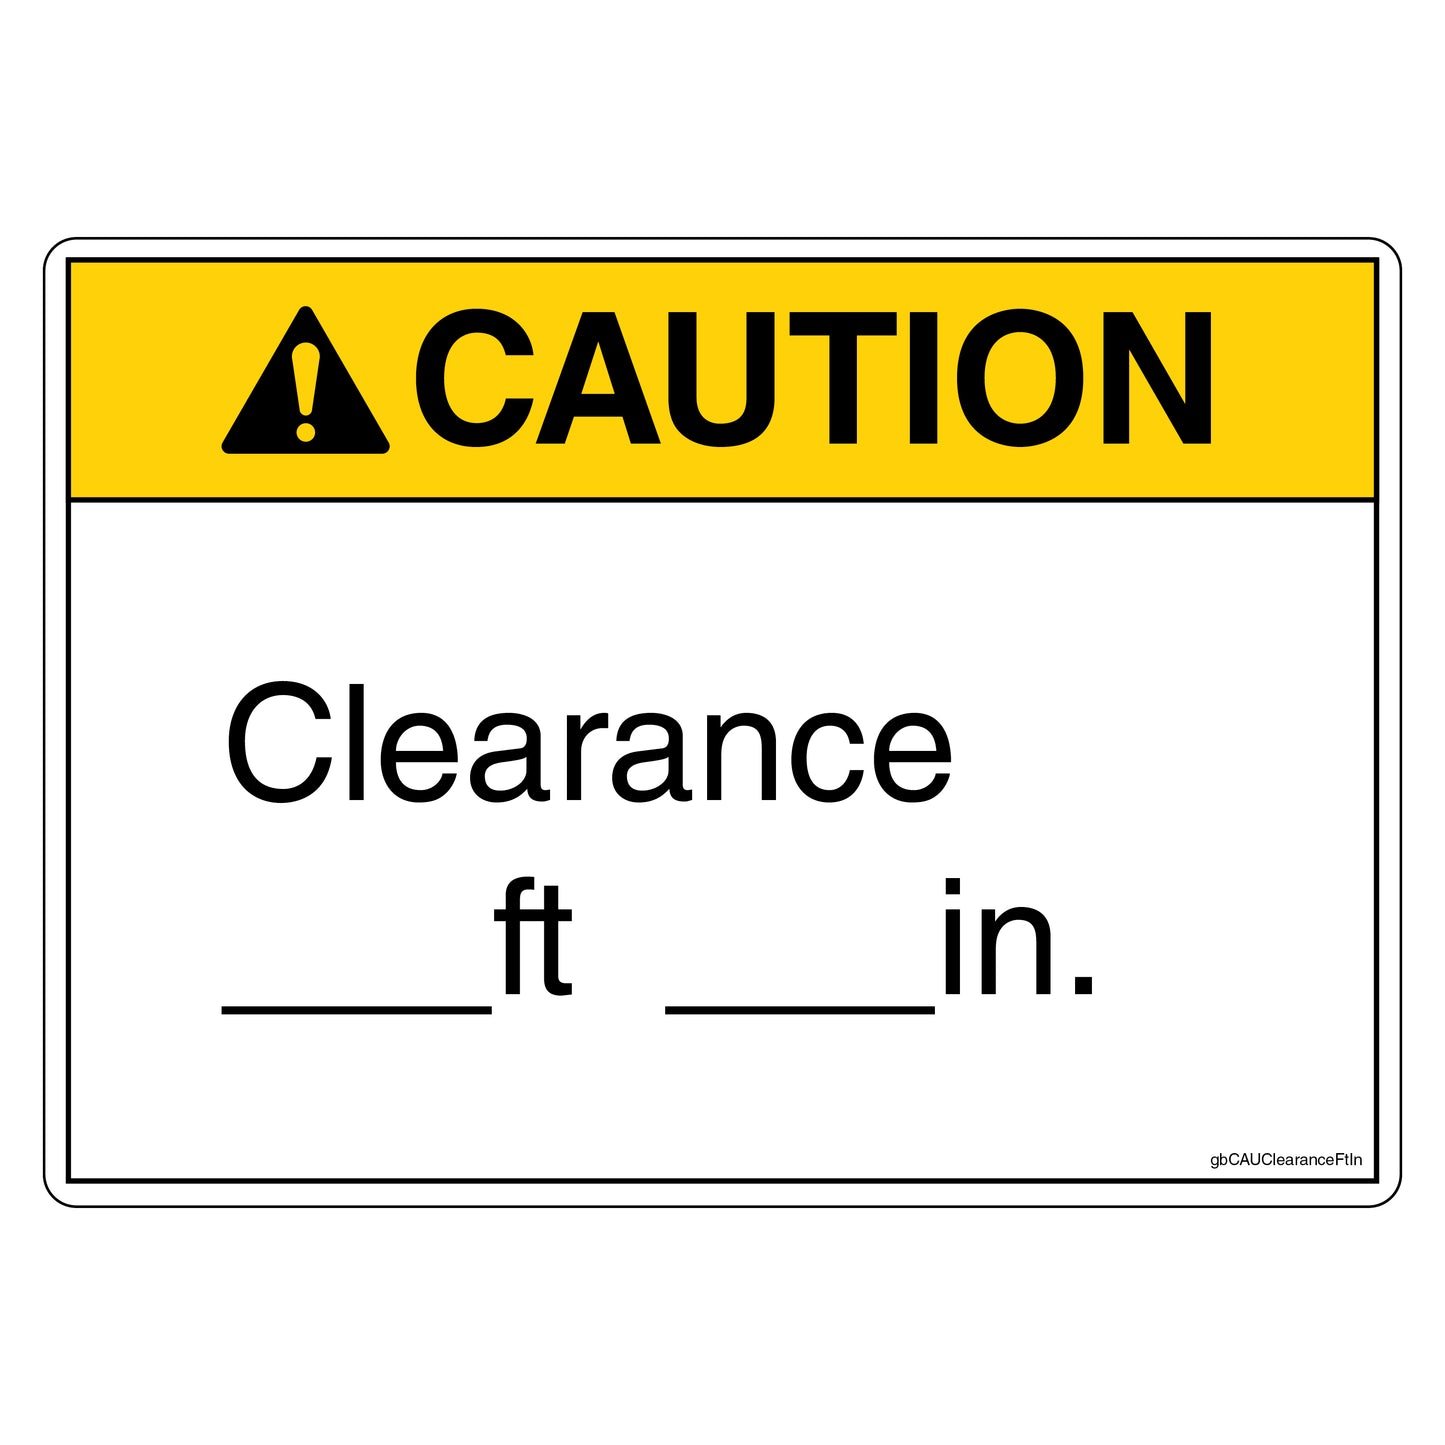 Caution Clearance Decal with Blank Ft & In for Customization.